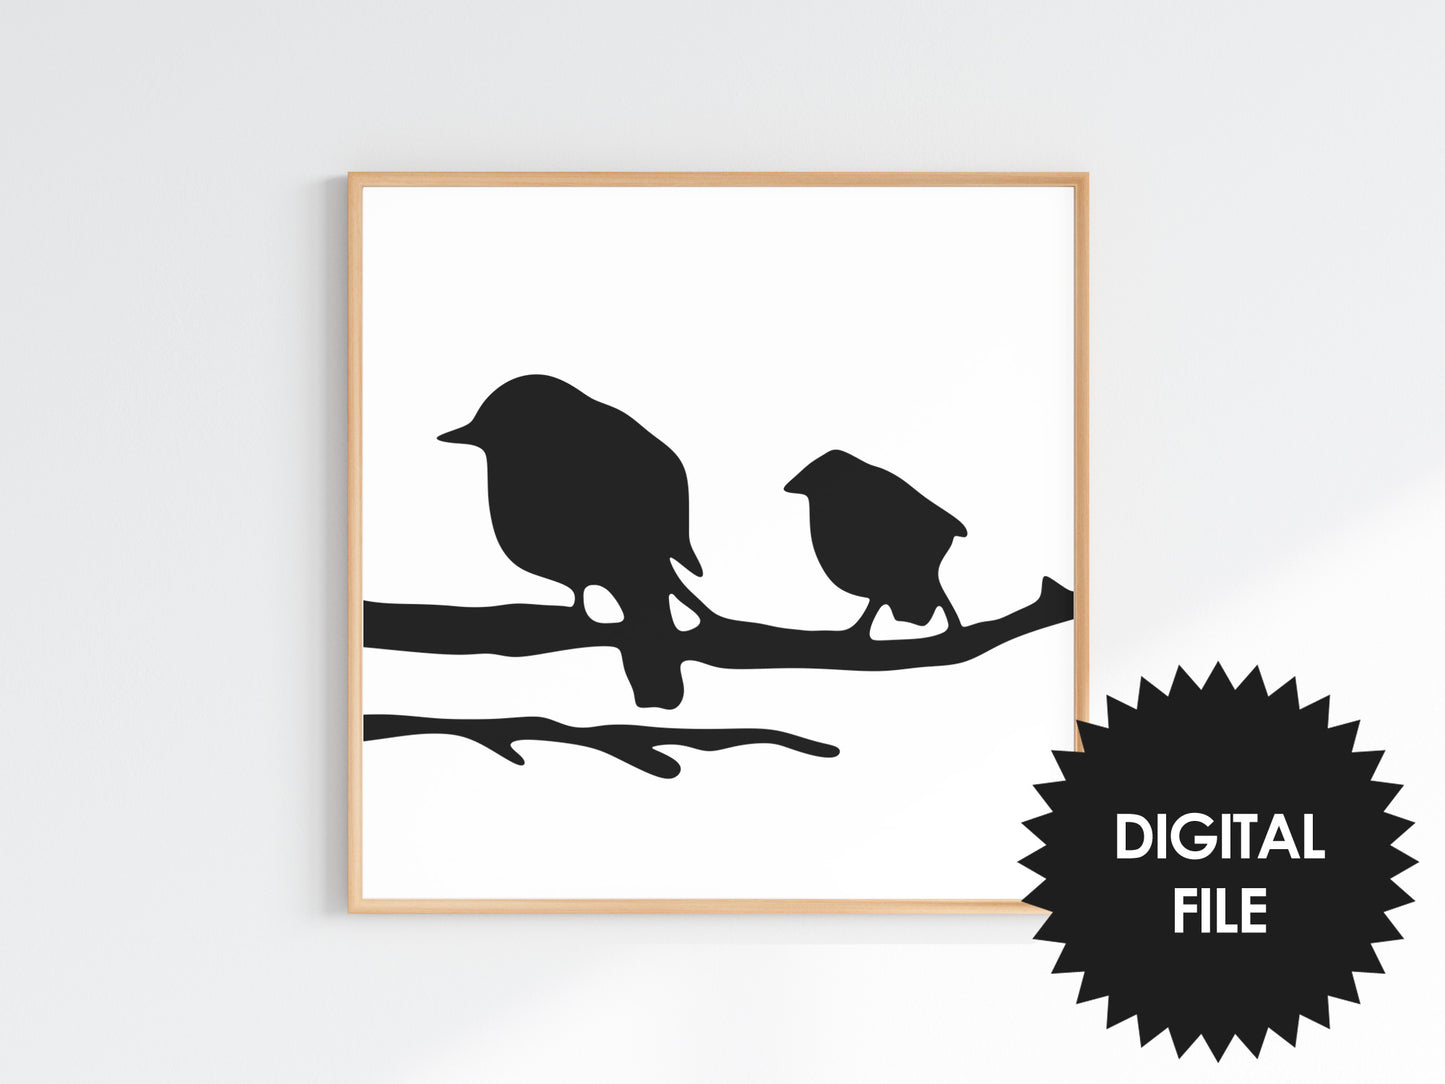 Birds Simple Abstract Art Print, Set of 2, Black & White Wall Art, Digital Art Poster Download, Modern Square Art Prints, Print Up To 20x20inches